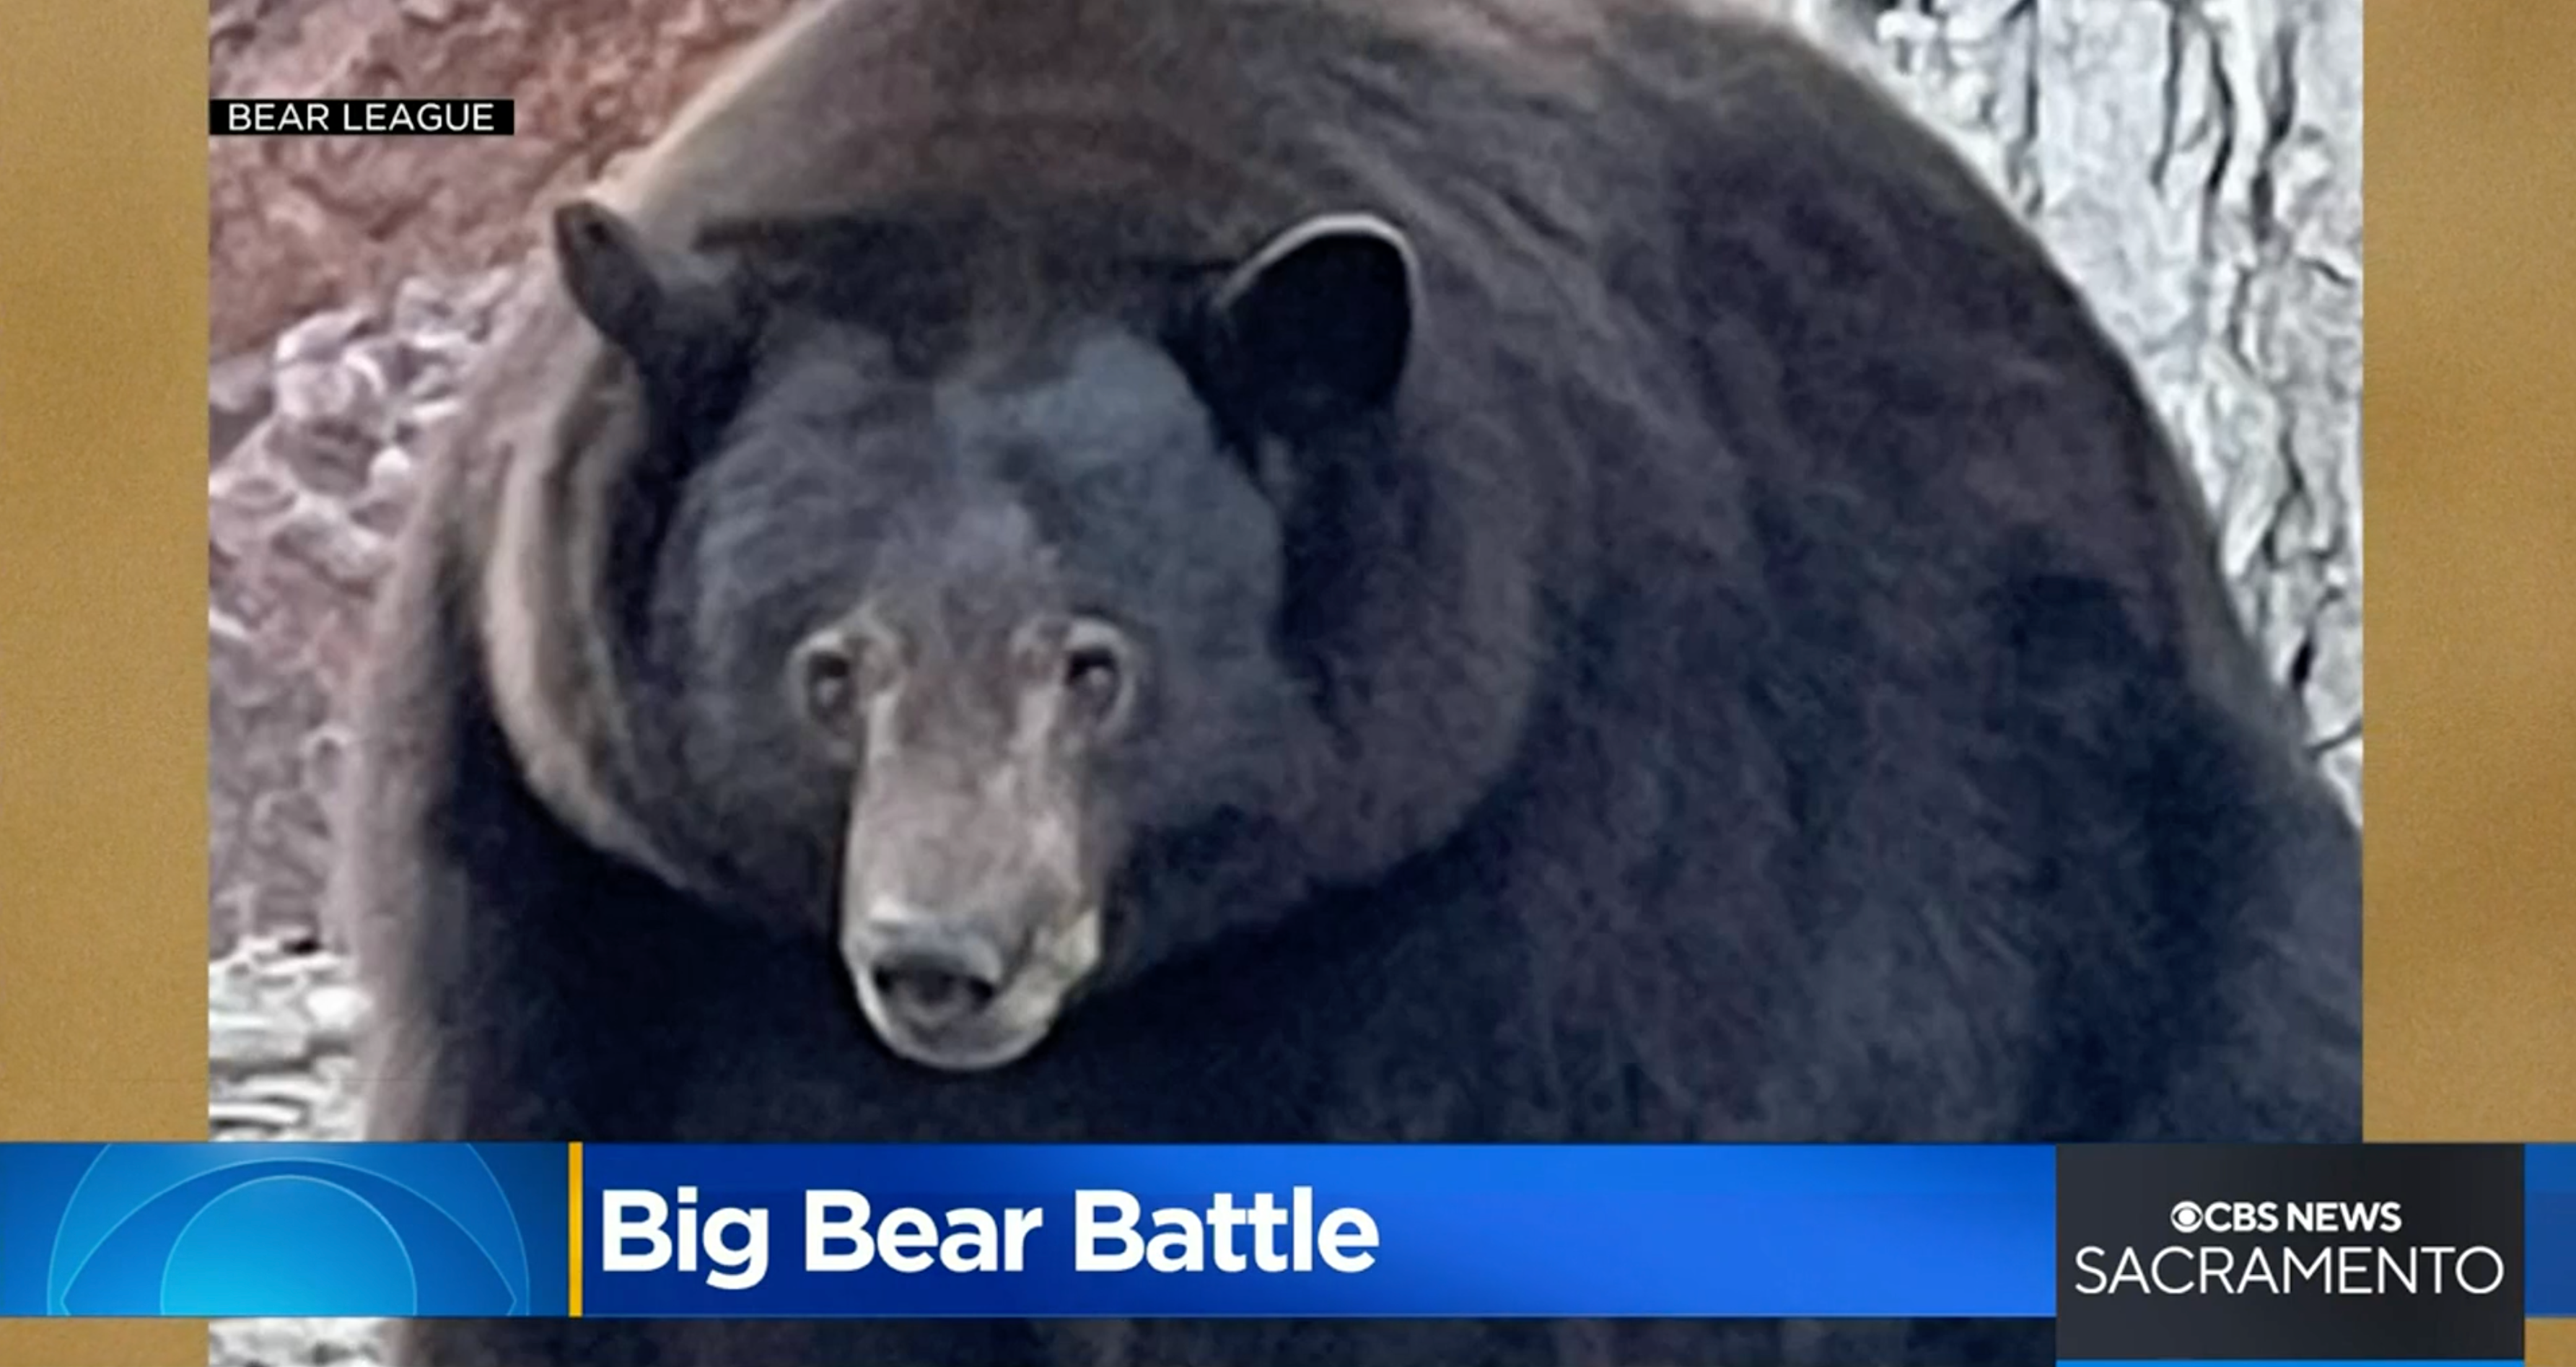 A 500-pound bear dubbed ‘Hank the Tank’ has been ravaging homes in South Lake Tahoe, California